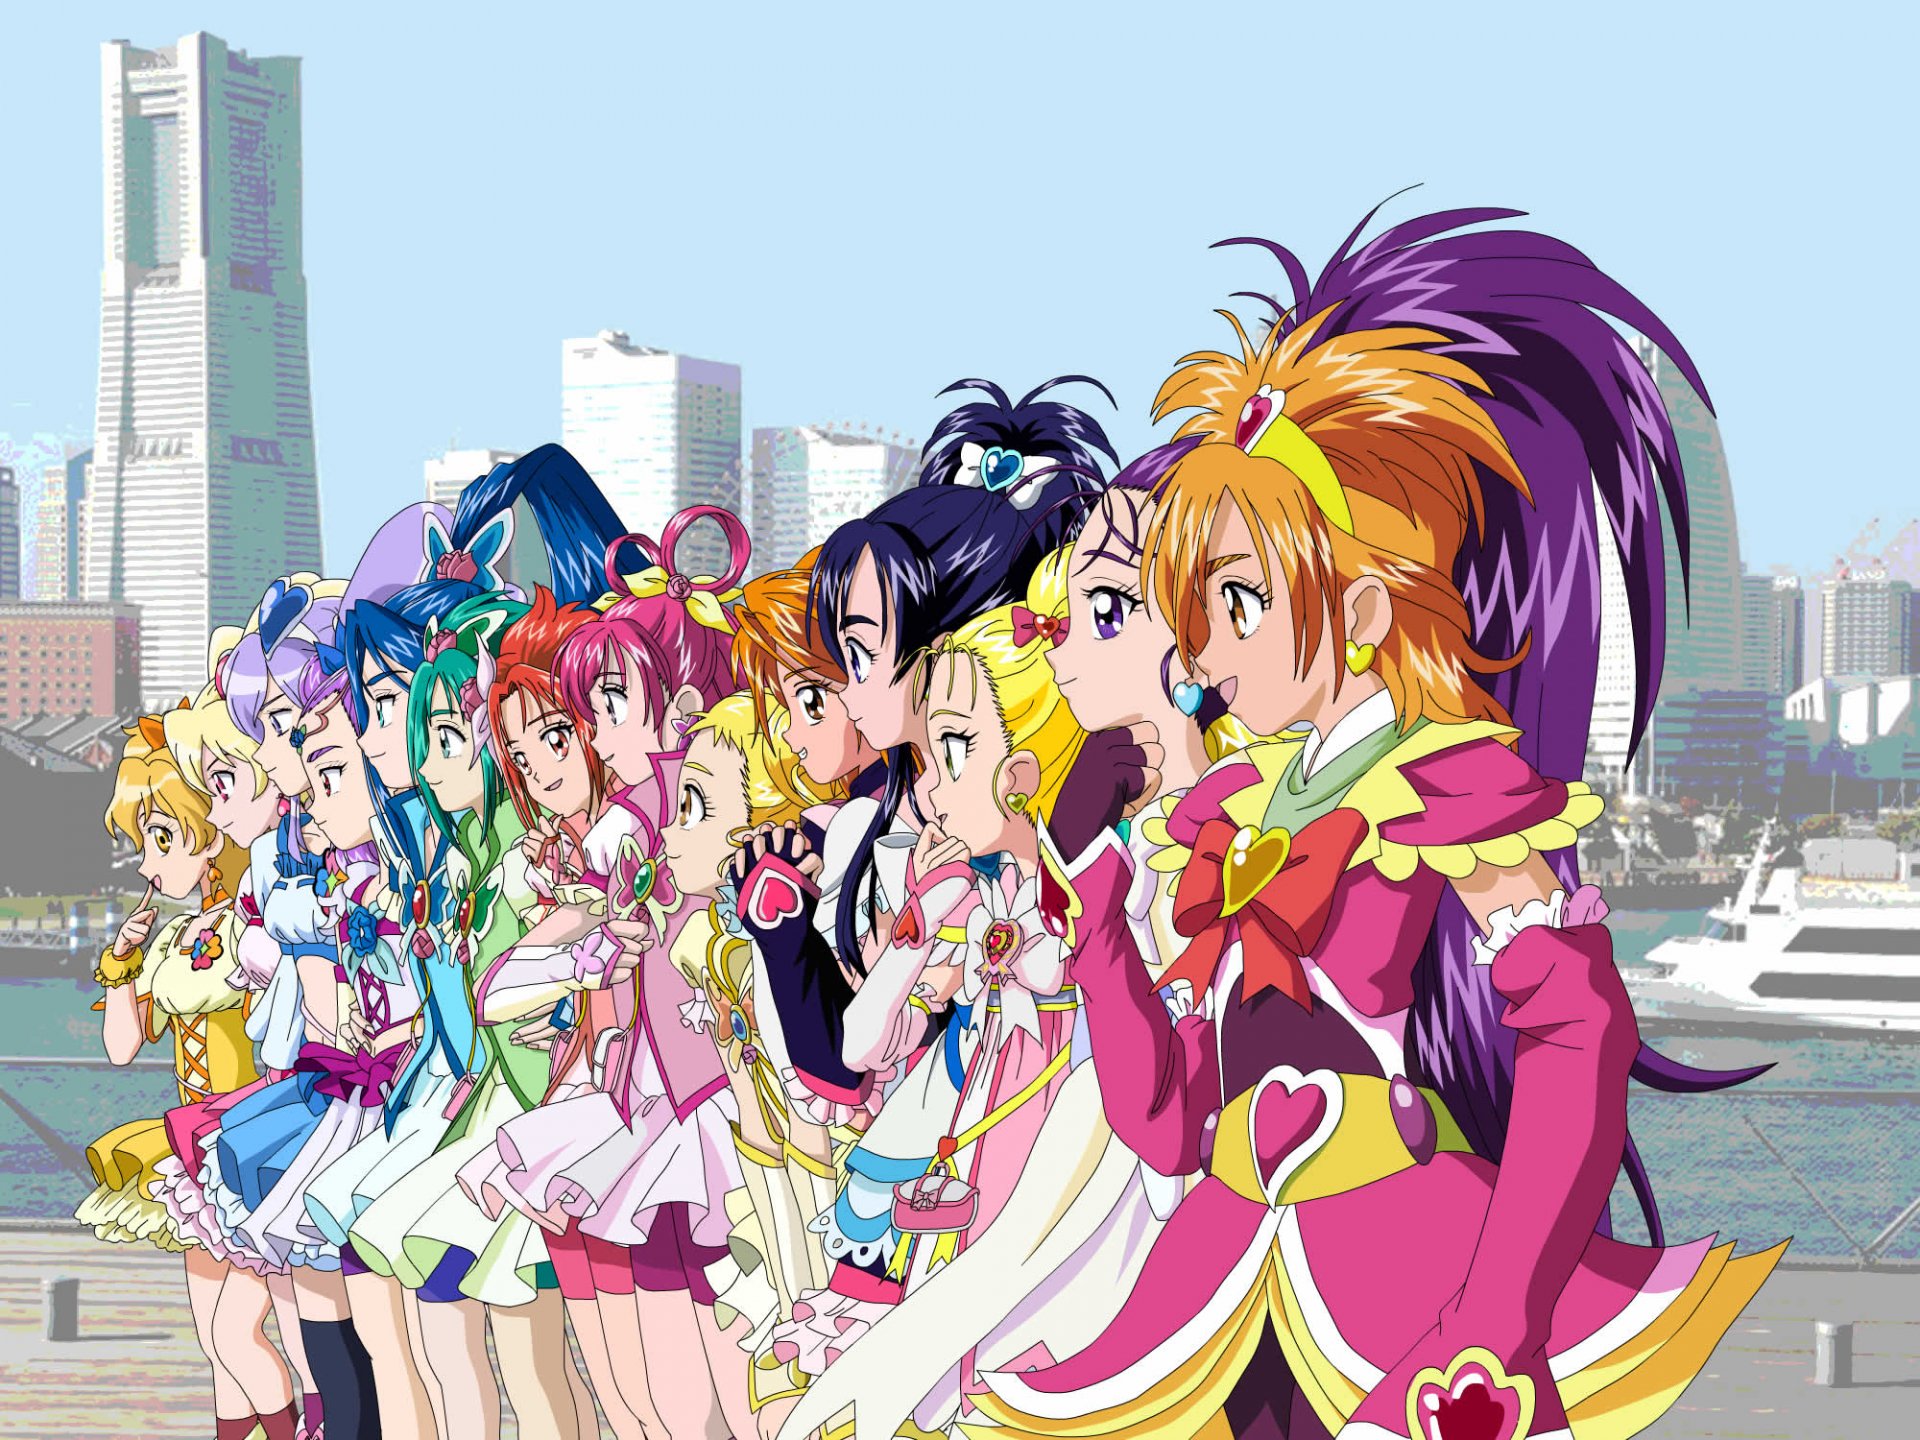 Precure Ideas In Anime Pretty Cure The Cure My Xxx Hot Girl